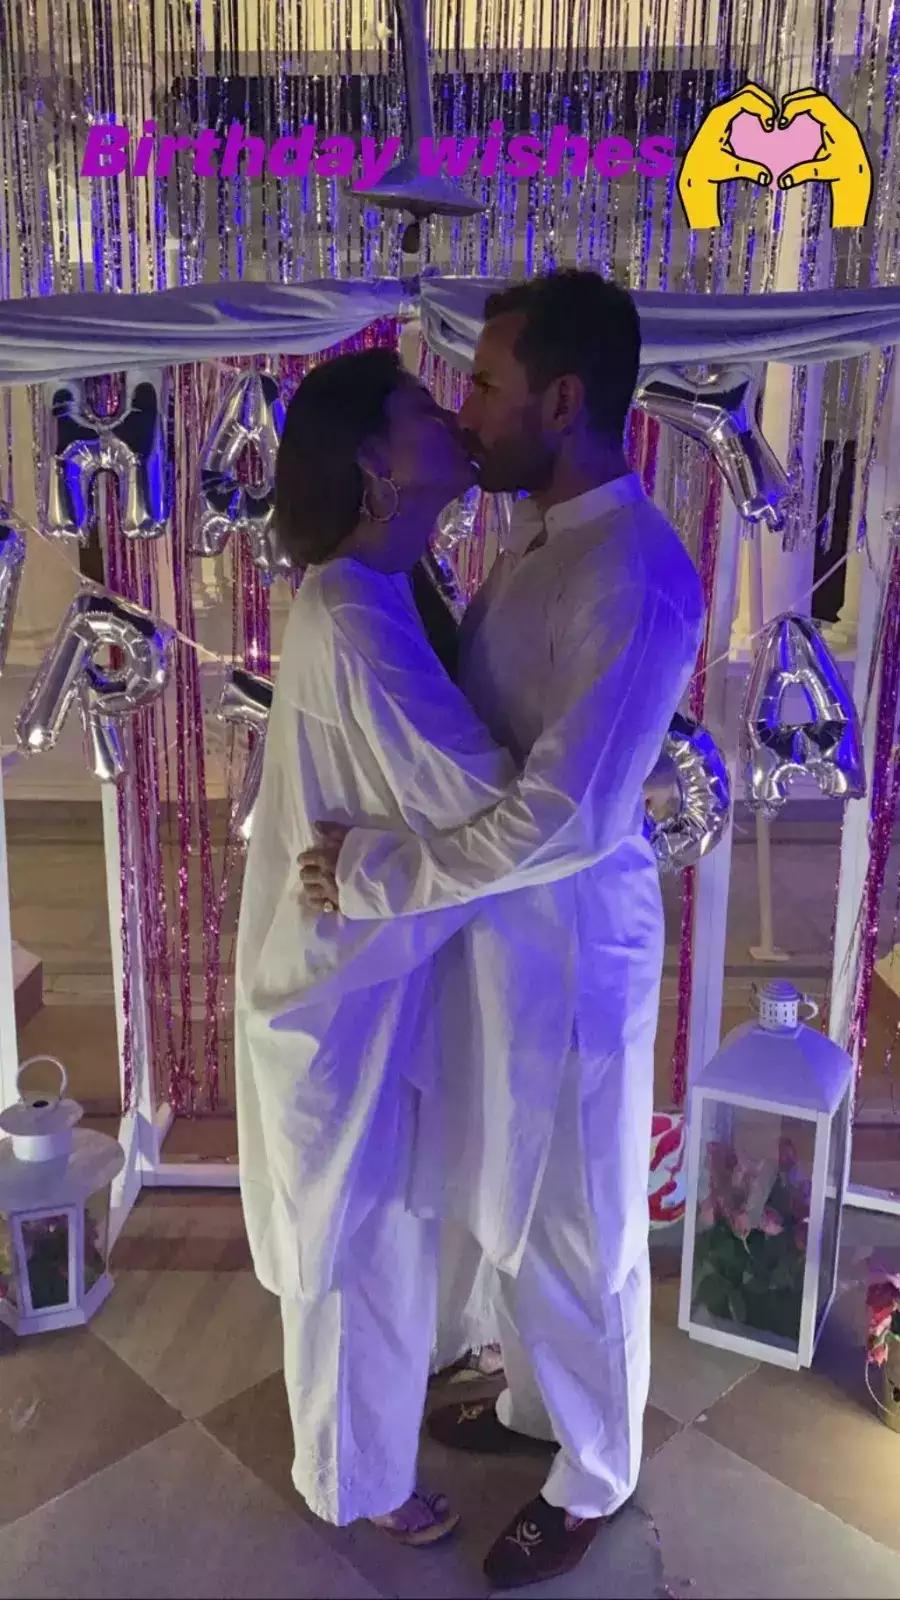 Kareena Kapoor and Saif Ali Khan have been happily married for many years. However, Kareena shared a rare picture of them sharing a kiss on Saif's birthday. Don't they look adorable?